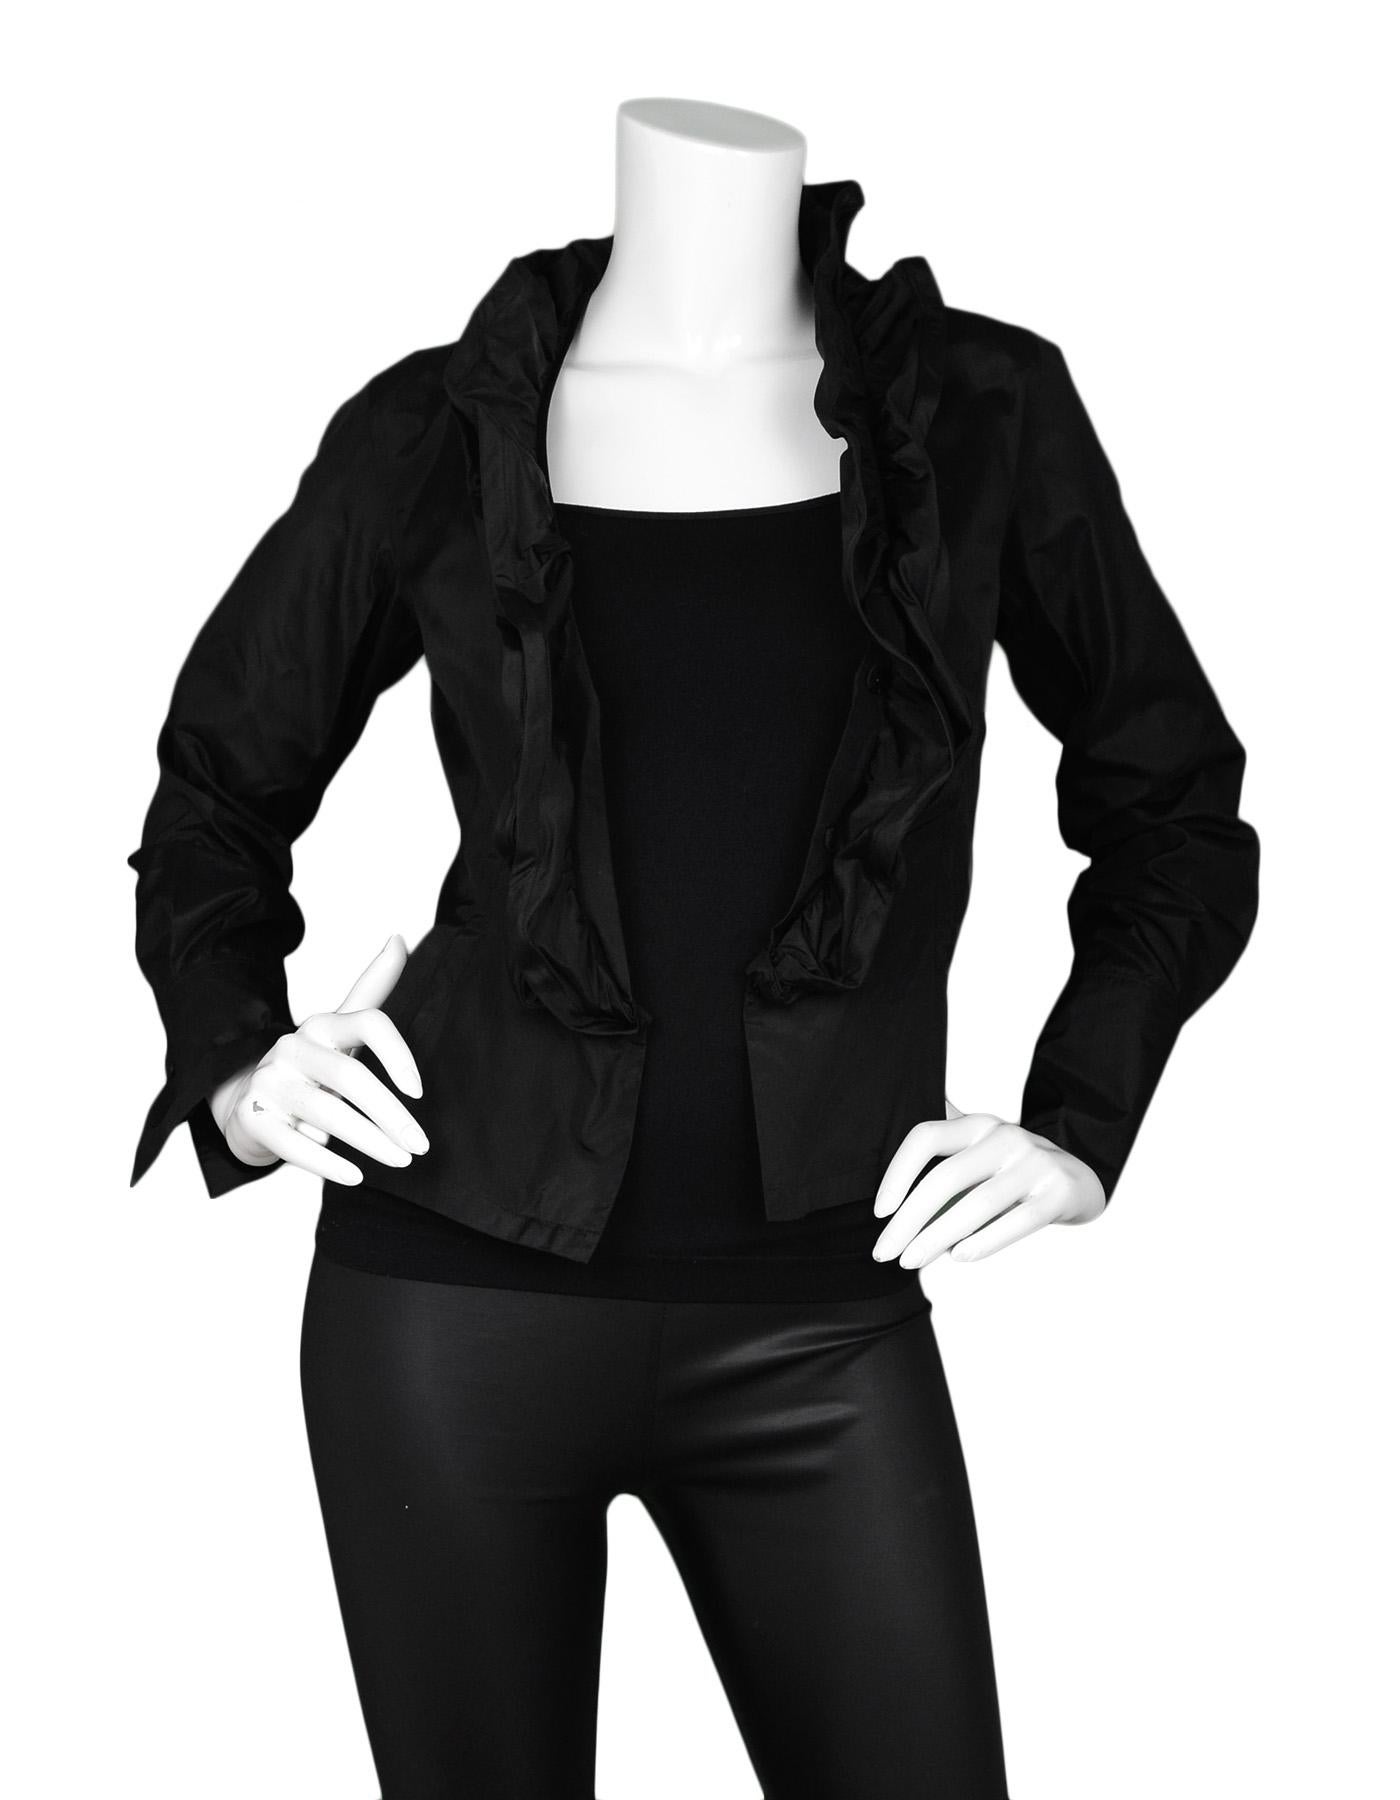 Donna Karan Black Ruffle Front Silk Jacket Sz 2

Made In: China
Color: Black
Materials: 100% silk
Opening/Closure: Snap front closure 
Overall Condition: Excellent pre-owned condition 

Measurements: 
Shoulder To Shoulder: 14